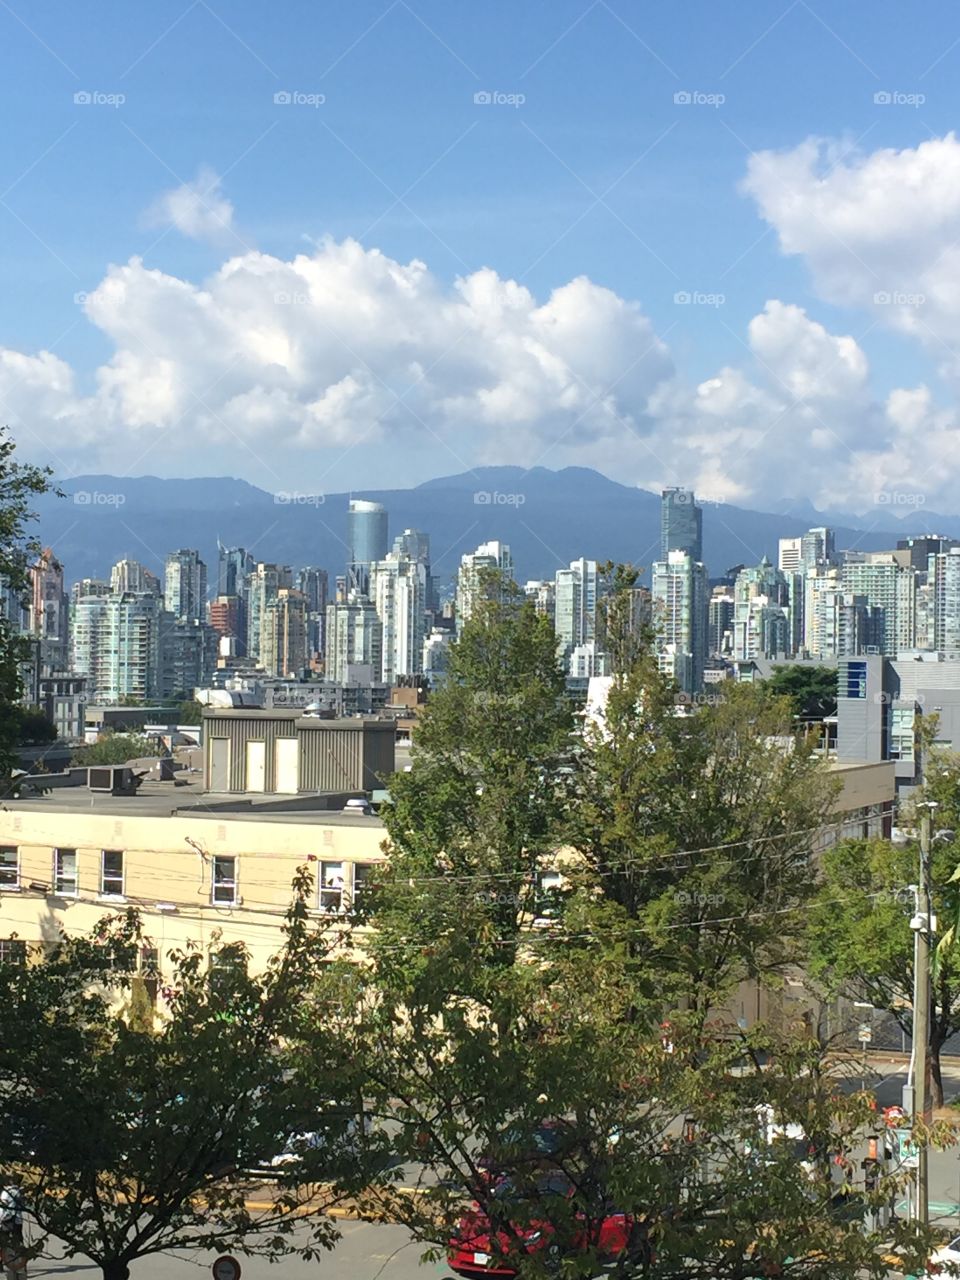 A slightly obstructed view of downtown with mountains in the distance in Vancouver, British Columbia.